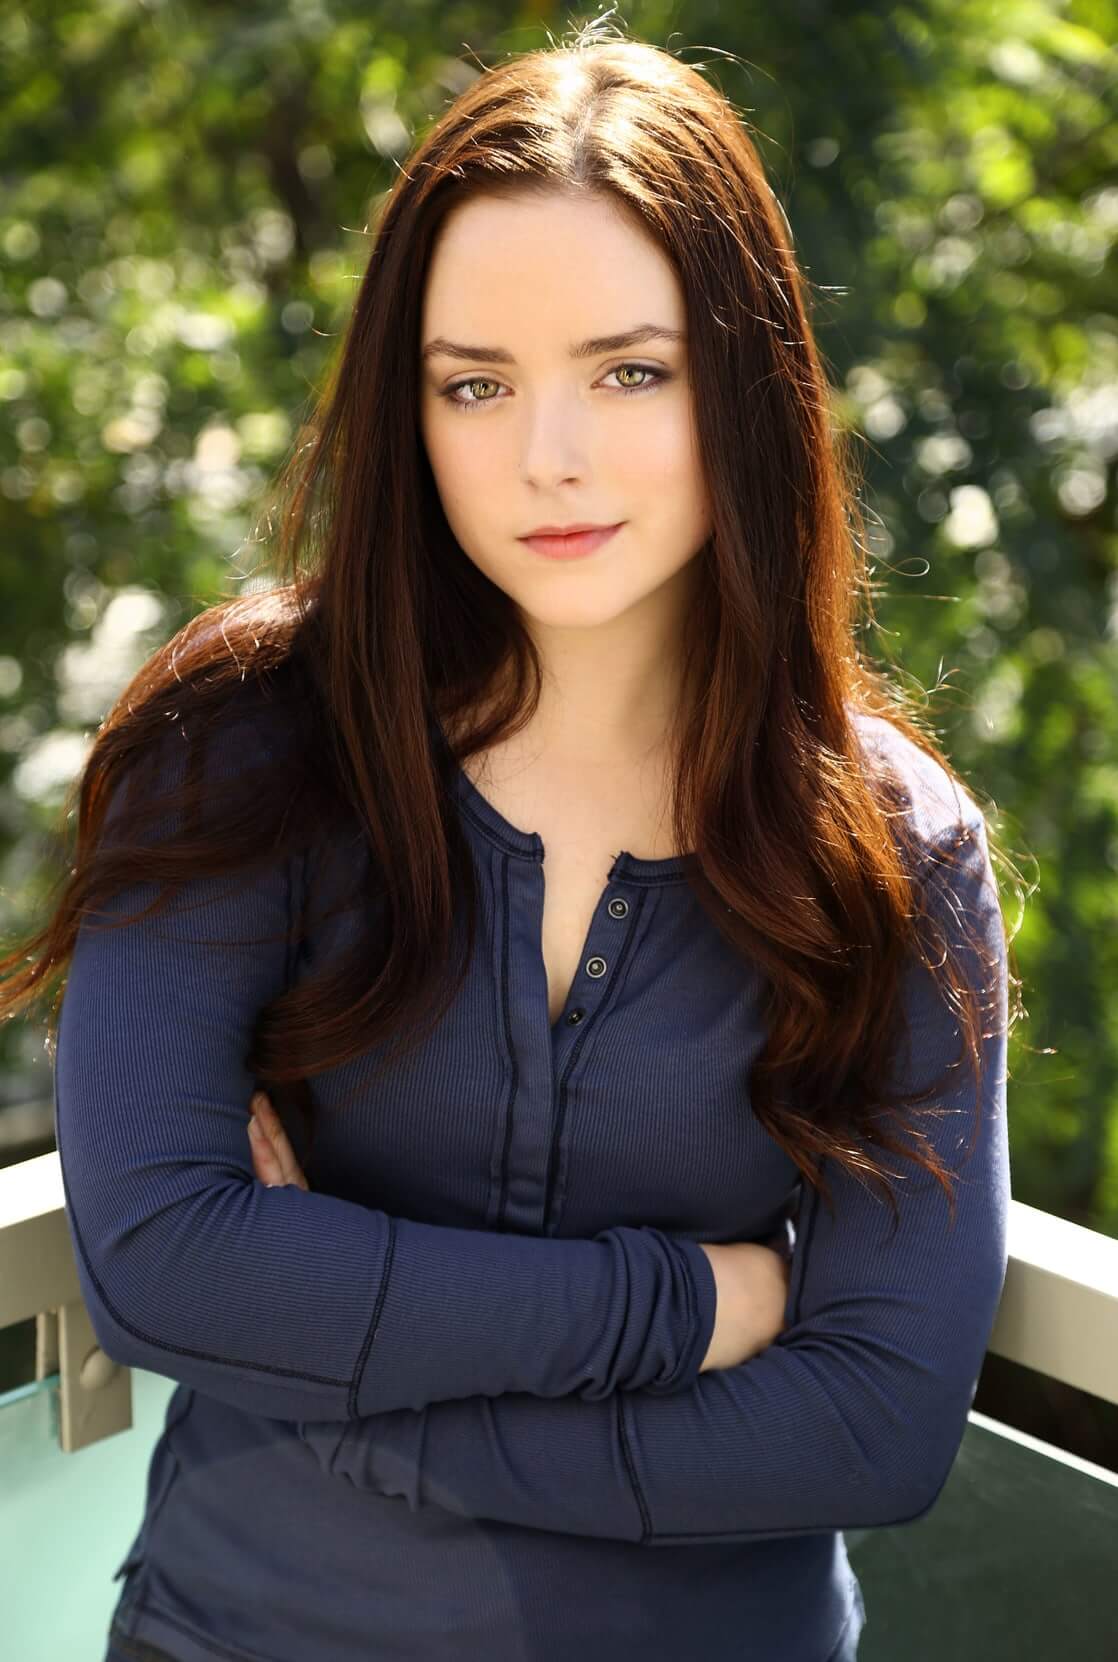 Hot Pictures Of Madison Davenport Are Going To Cheer You Up